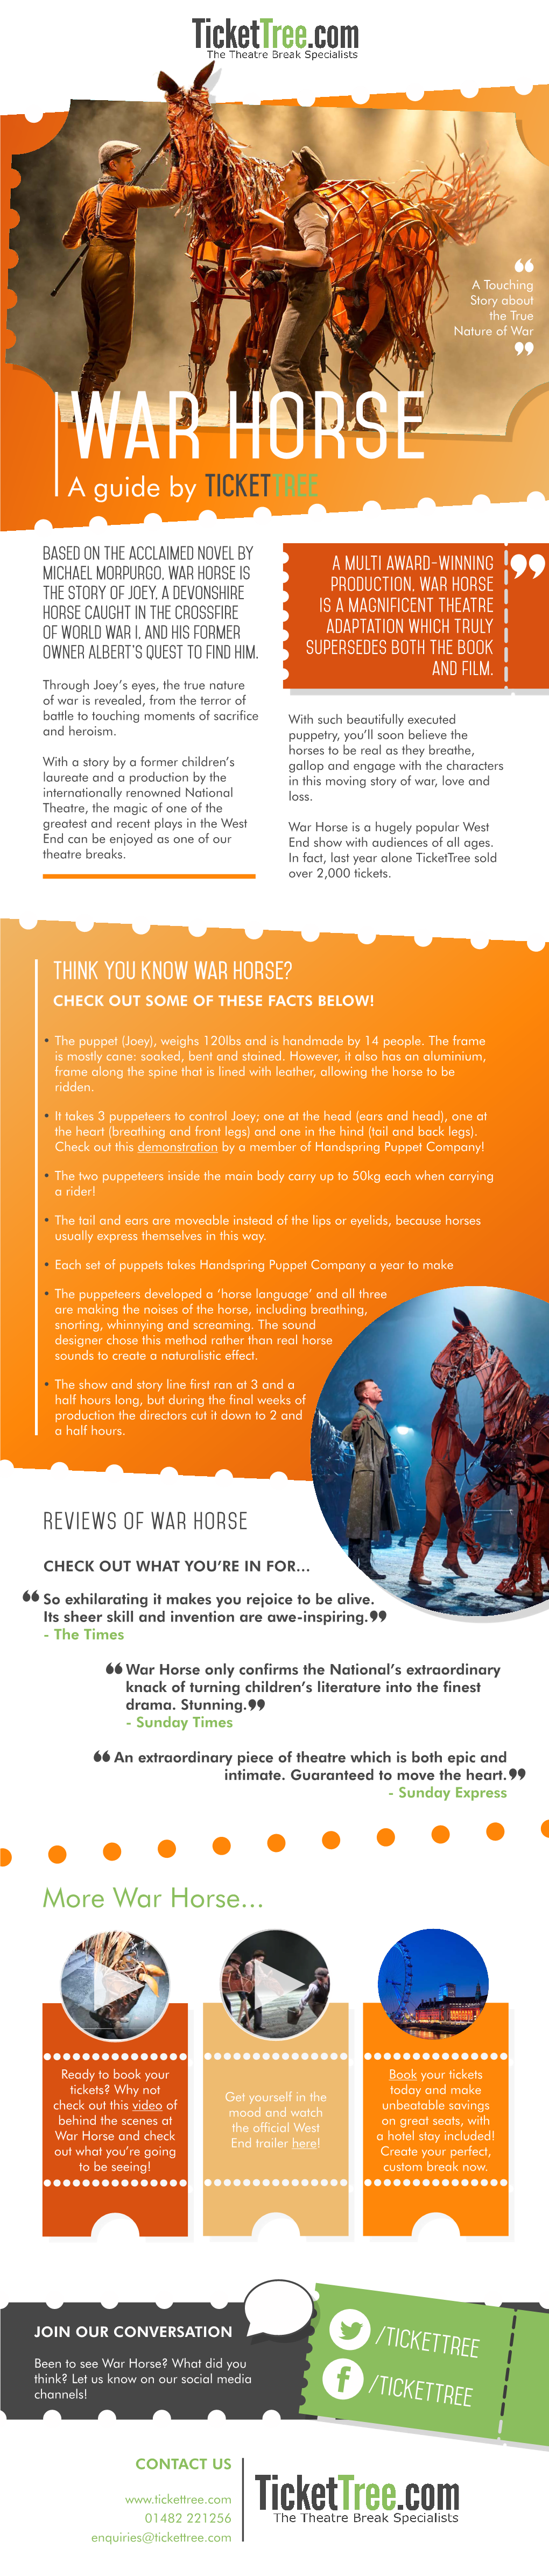 A Guide by Tickettree More War Horse